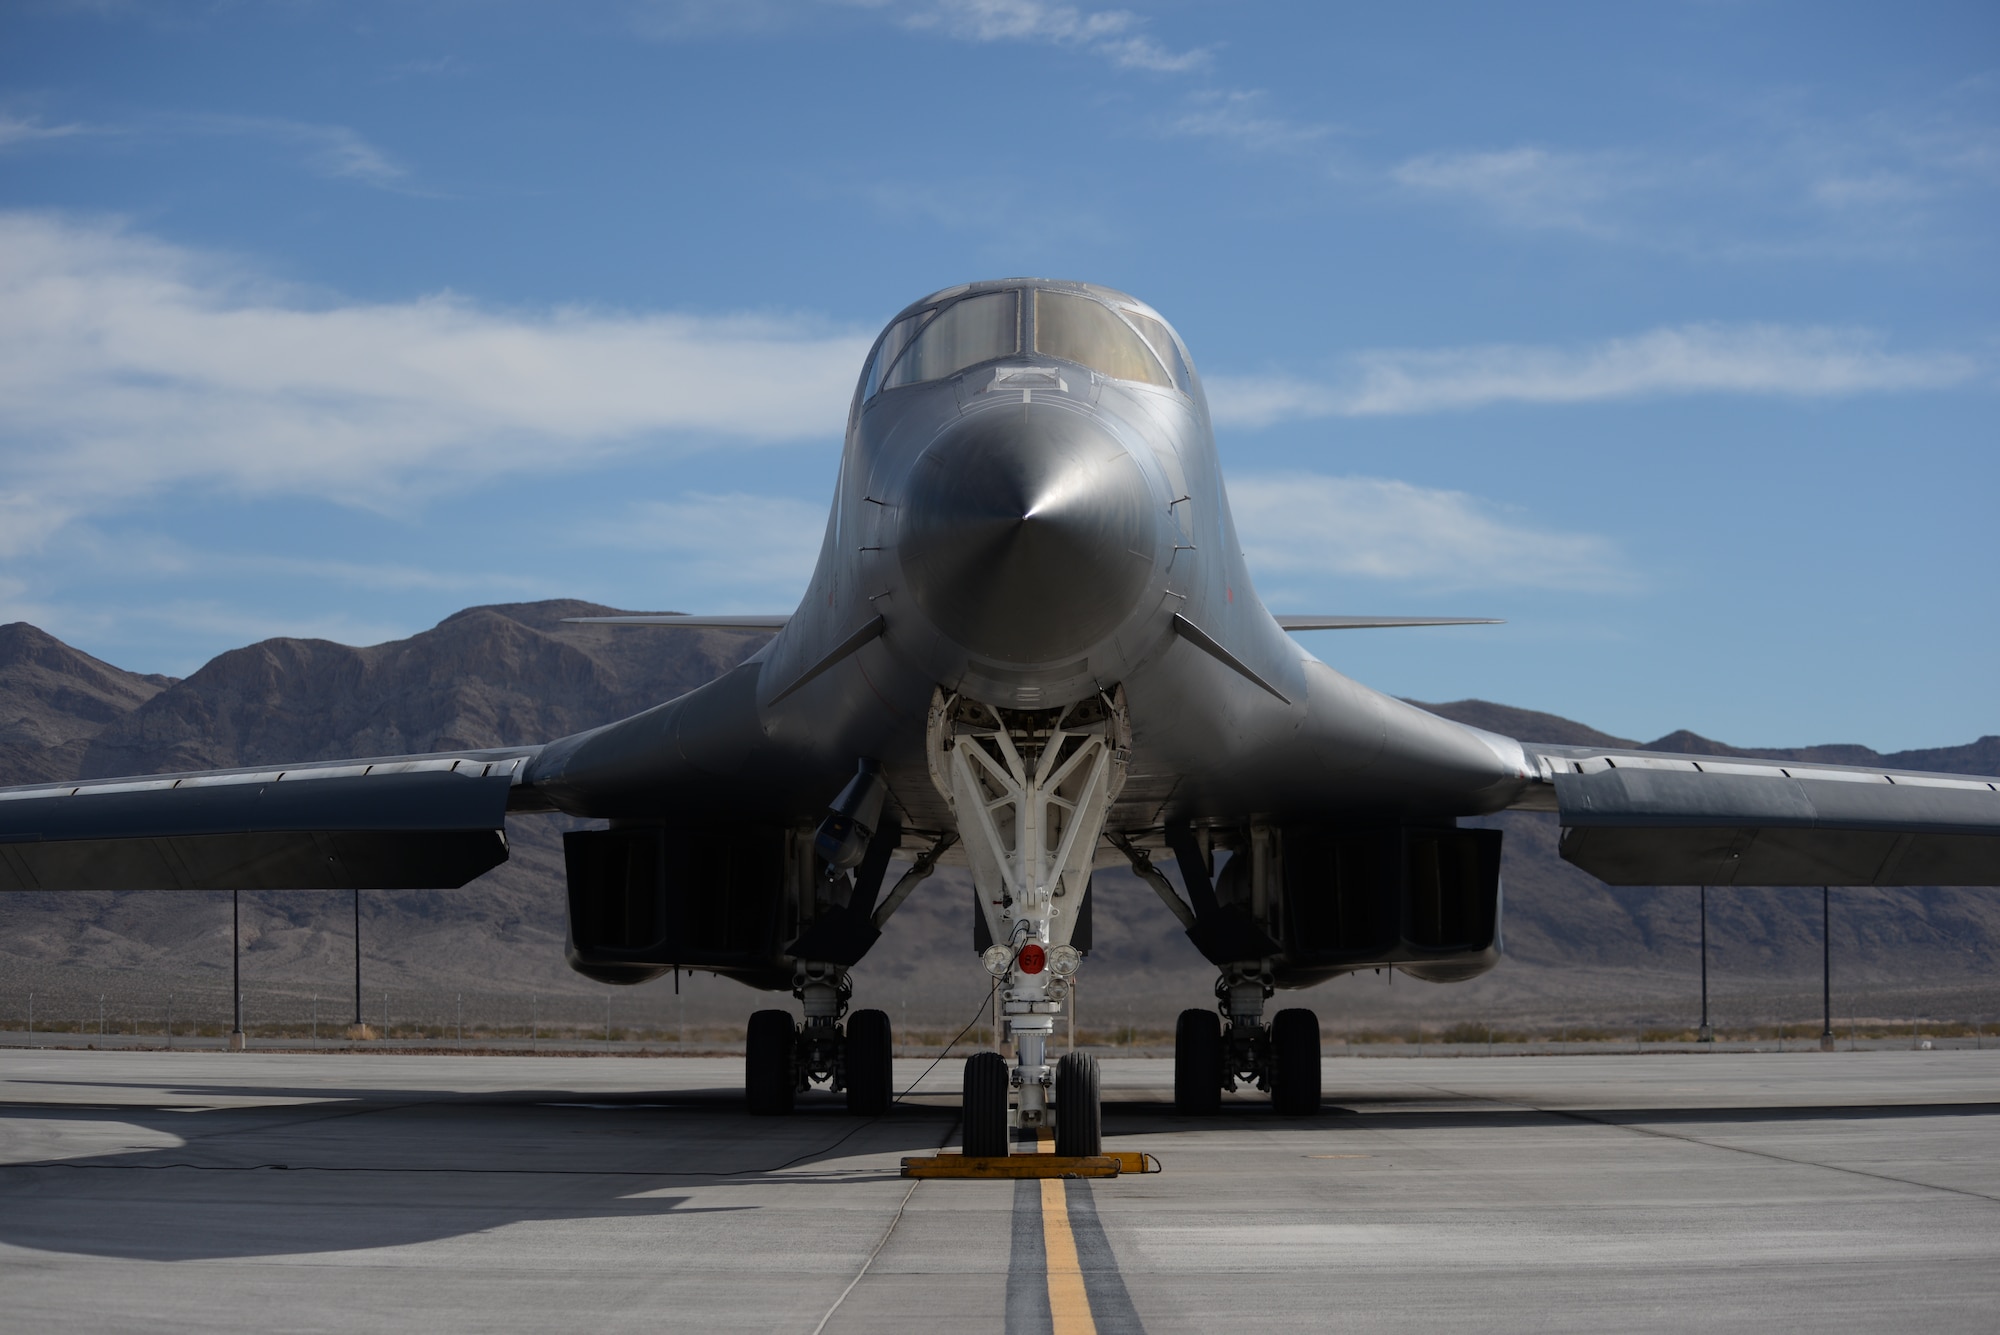 A B-1B Lancer, assigned to the 7th Bomb Wing, Dyess Air Force Base, Texas, sits on the flight line before take-off during Red Flag 16-1 at Nellis Air Force base, Nev., Jan. 29, 2016. Red Flag is one of a series of advanced training programs administered by the U.S. Air Force Warfare Center. (U.S. Air Force Photo by Airman 1st Class Kevin J. Tanenbaum)